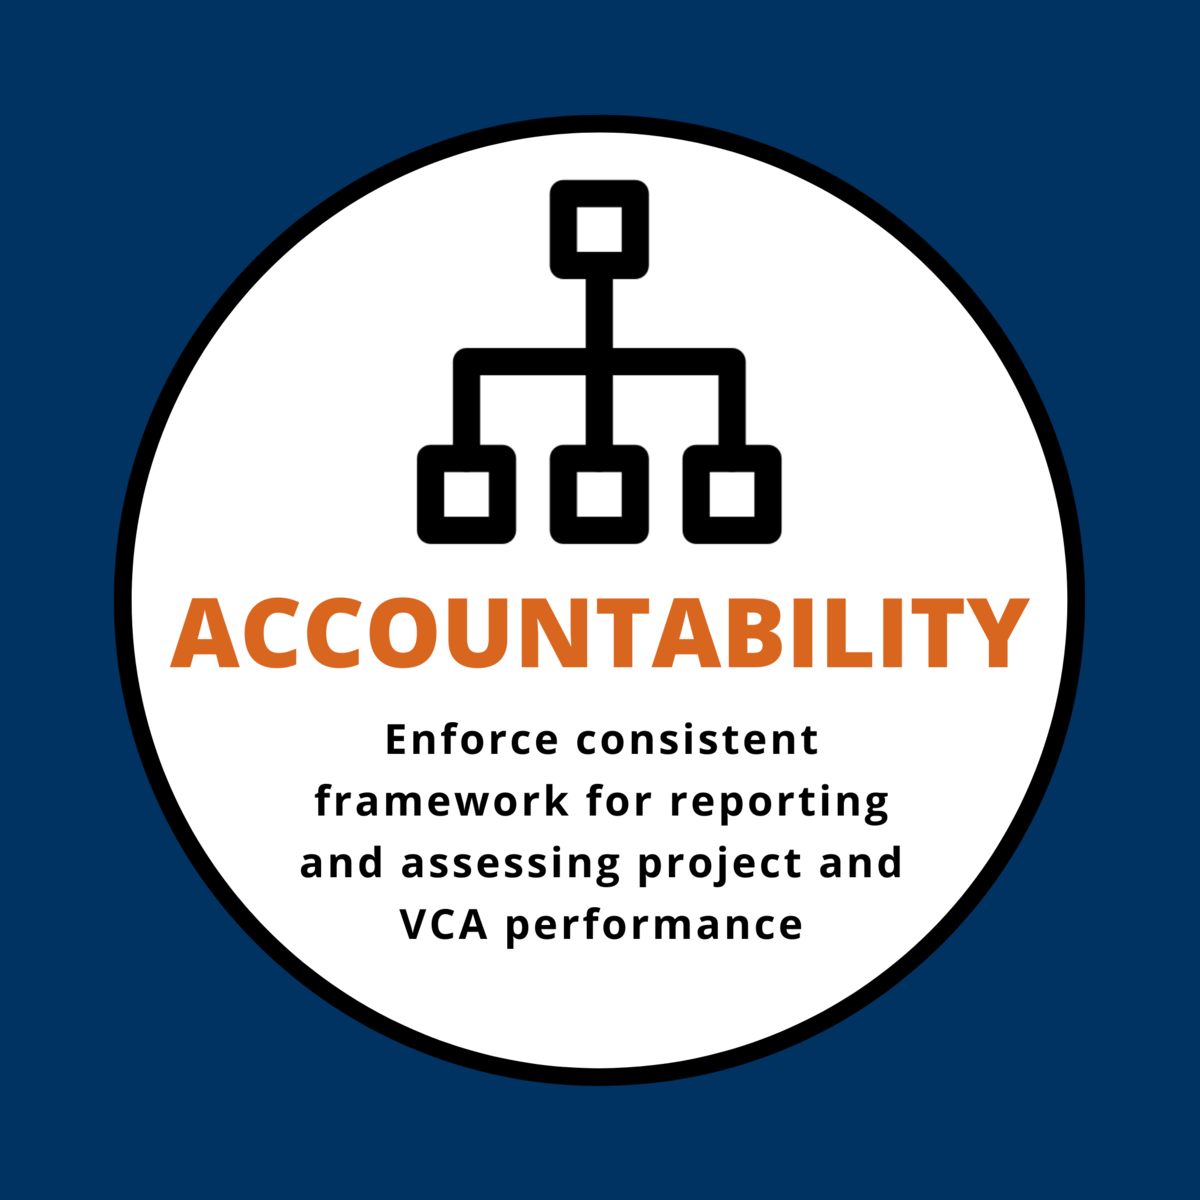 Accountability: Enforce consistent framework for reporting and assessing project and VCA performance